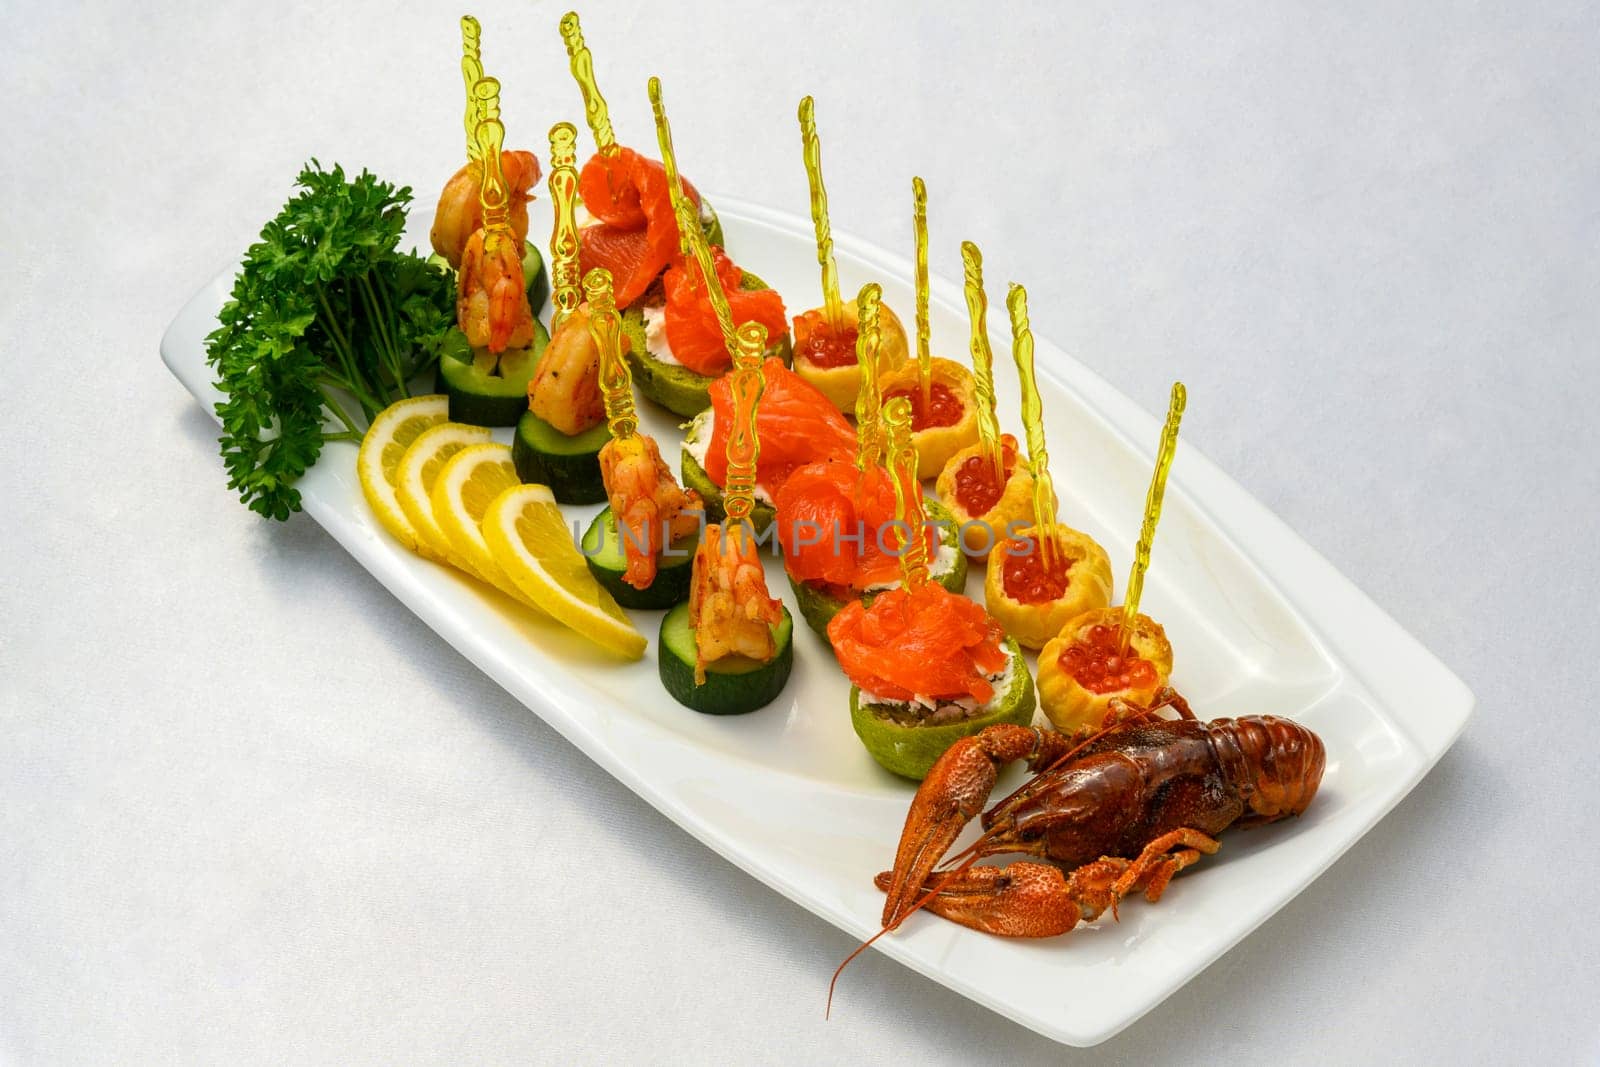 A cooked cancer with appetizers on skewers on the plate by A_Karim